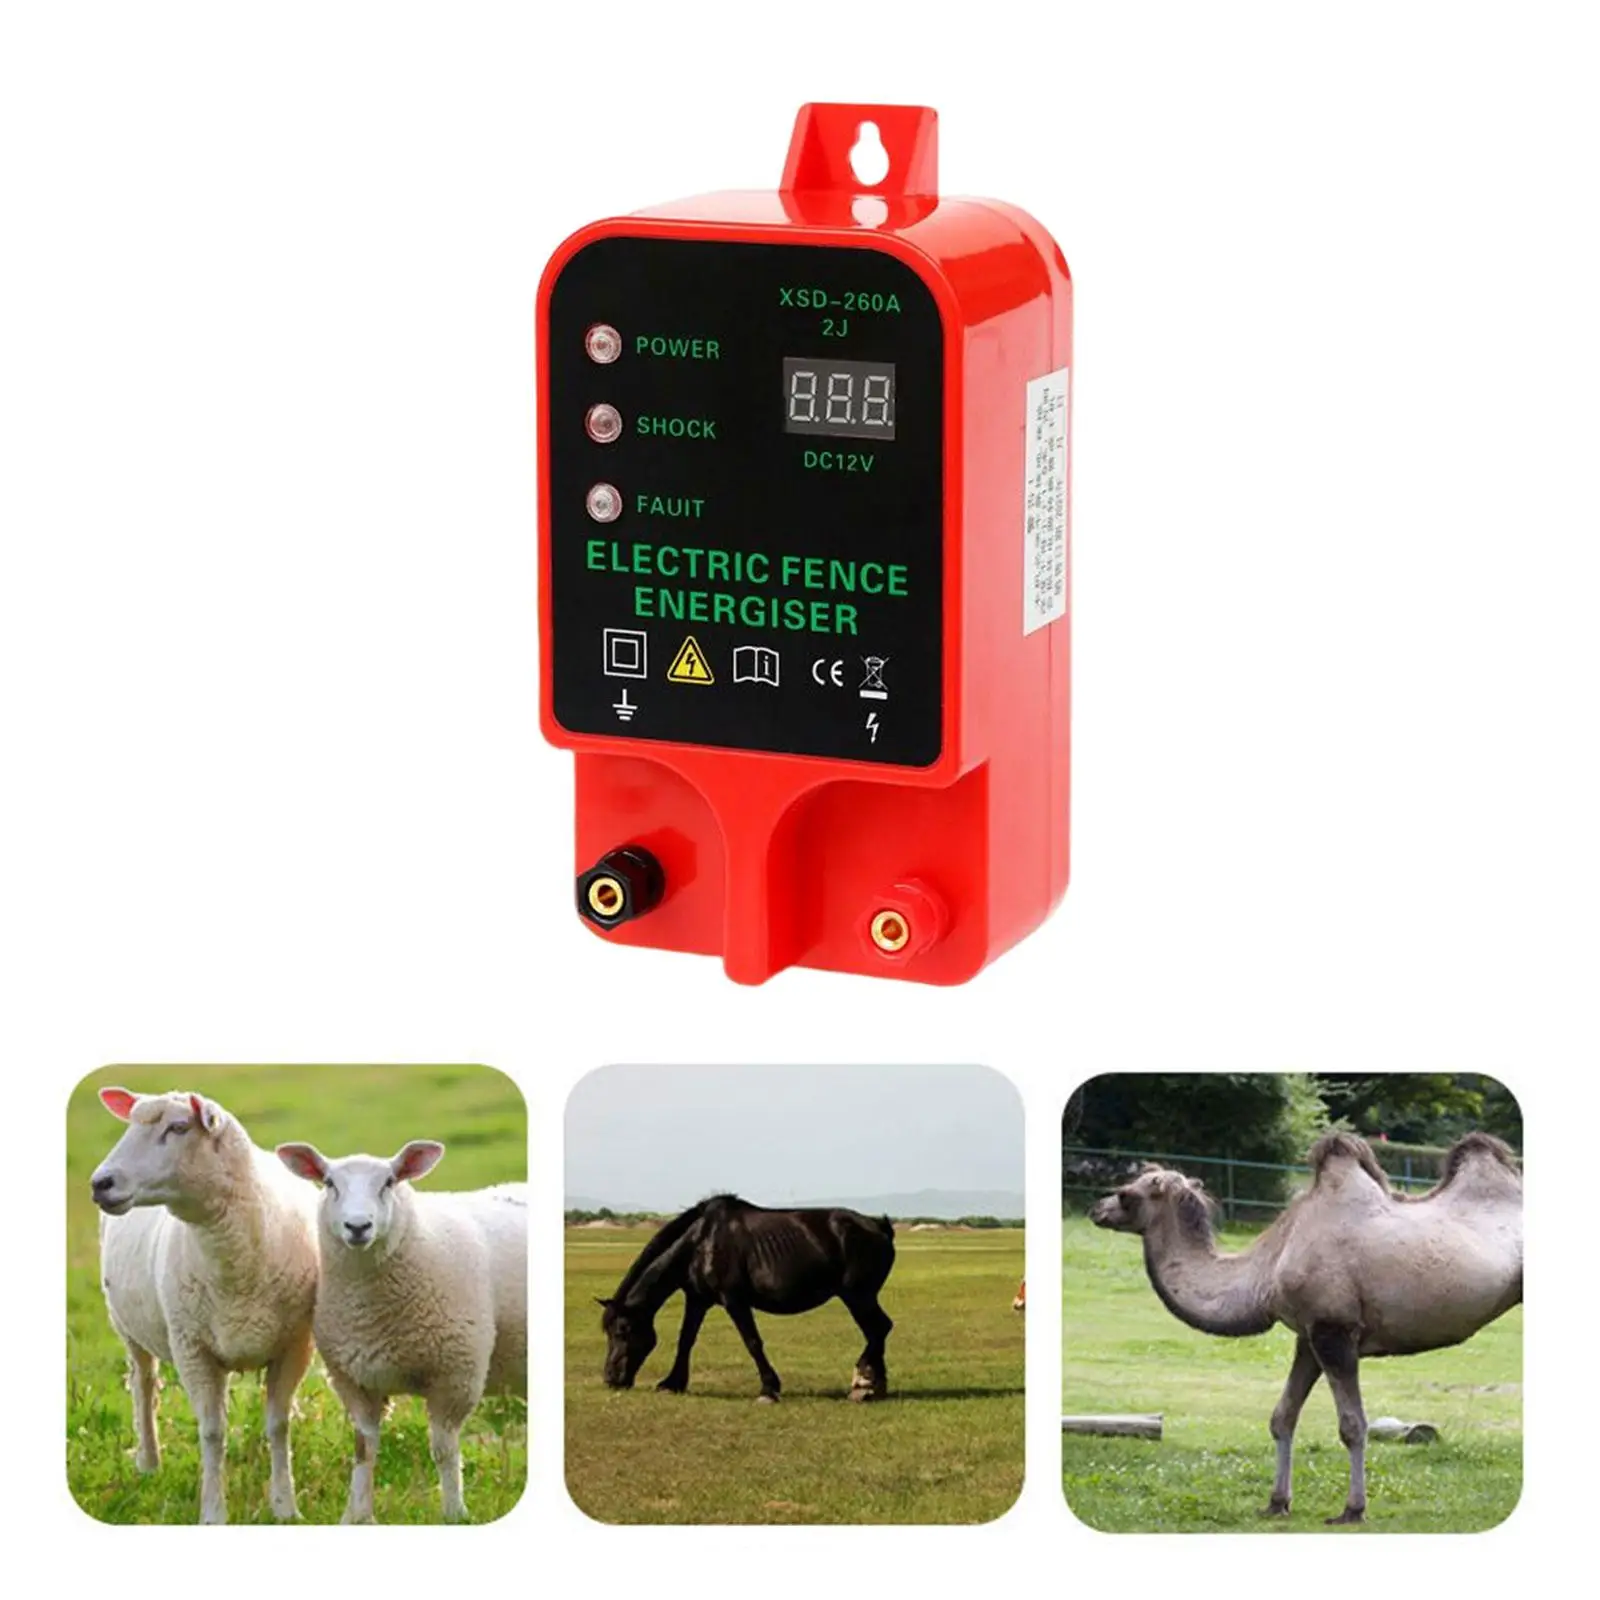 10km Electric Fence Controller EU Adapter Sheep Horse Cattle Poultry Fence Tool Waterproof LCD Display for Agricultural Fencing